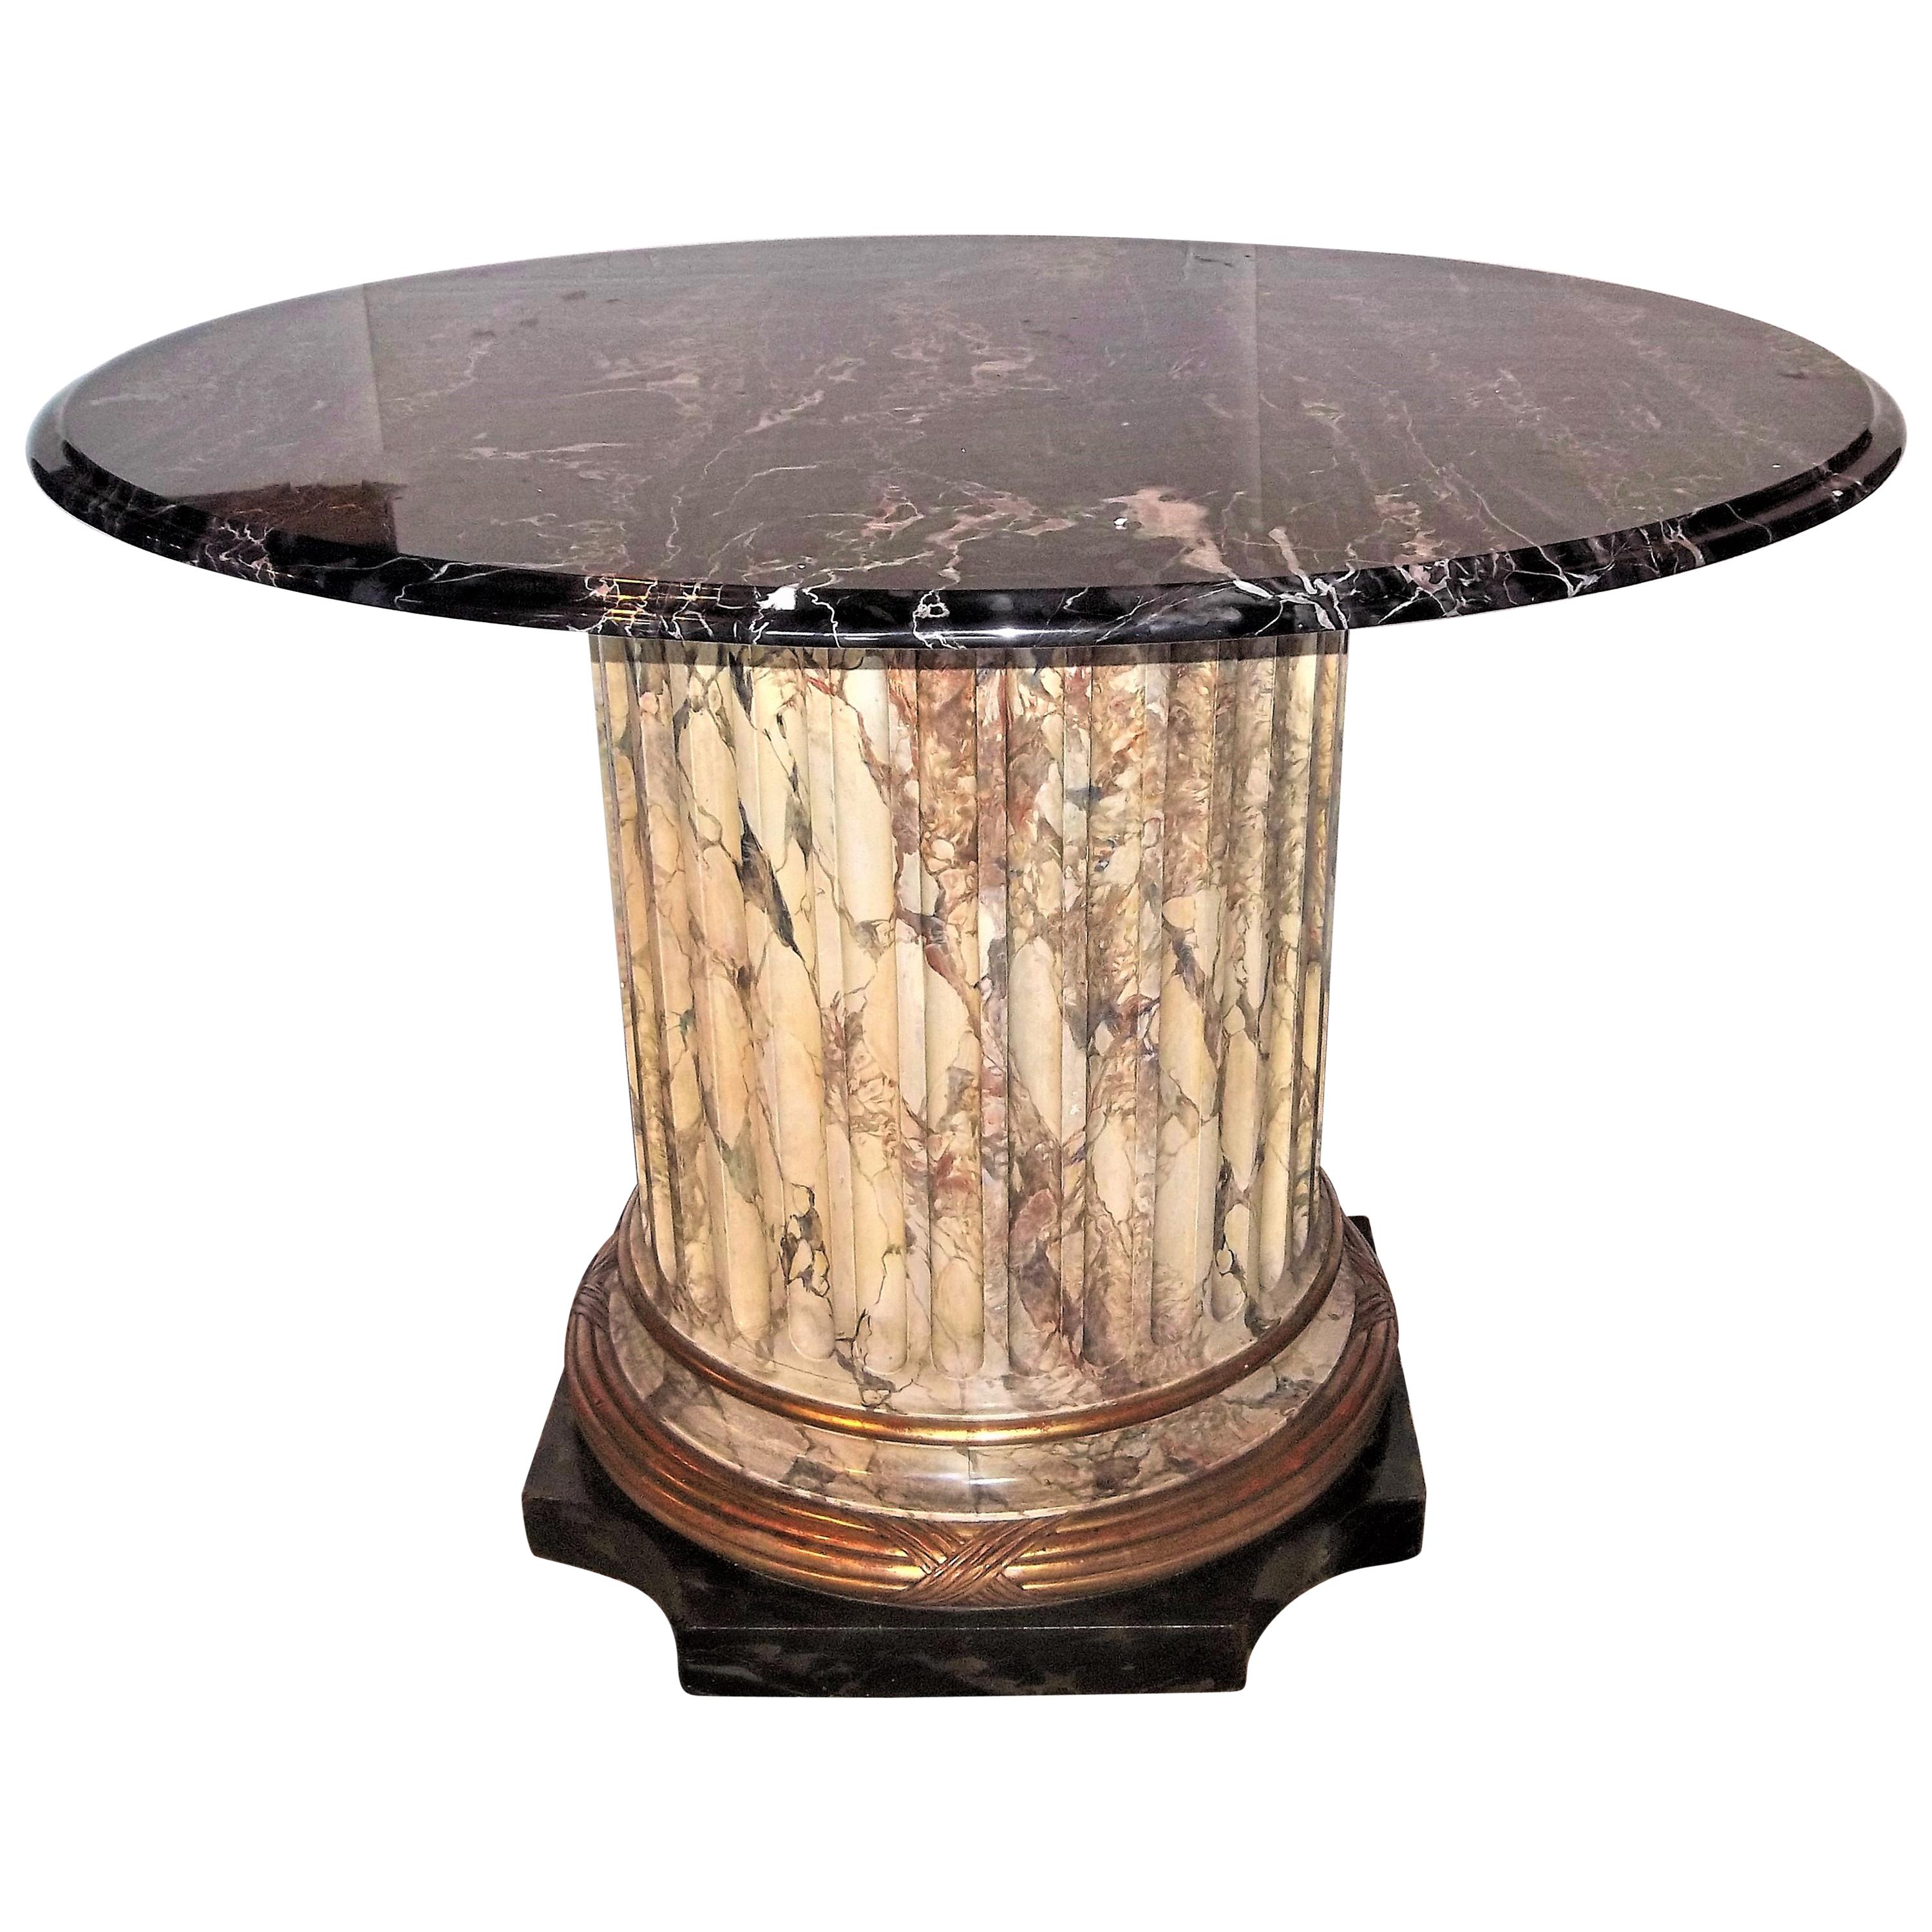 Faux Marble Fluted Center Table with Black and Gold Veined Marble Top